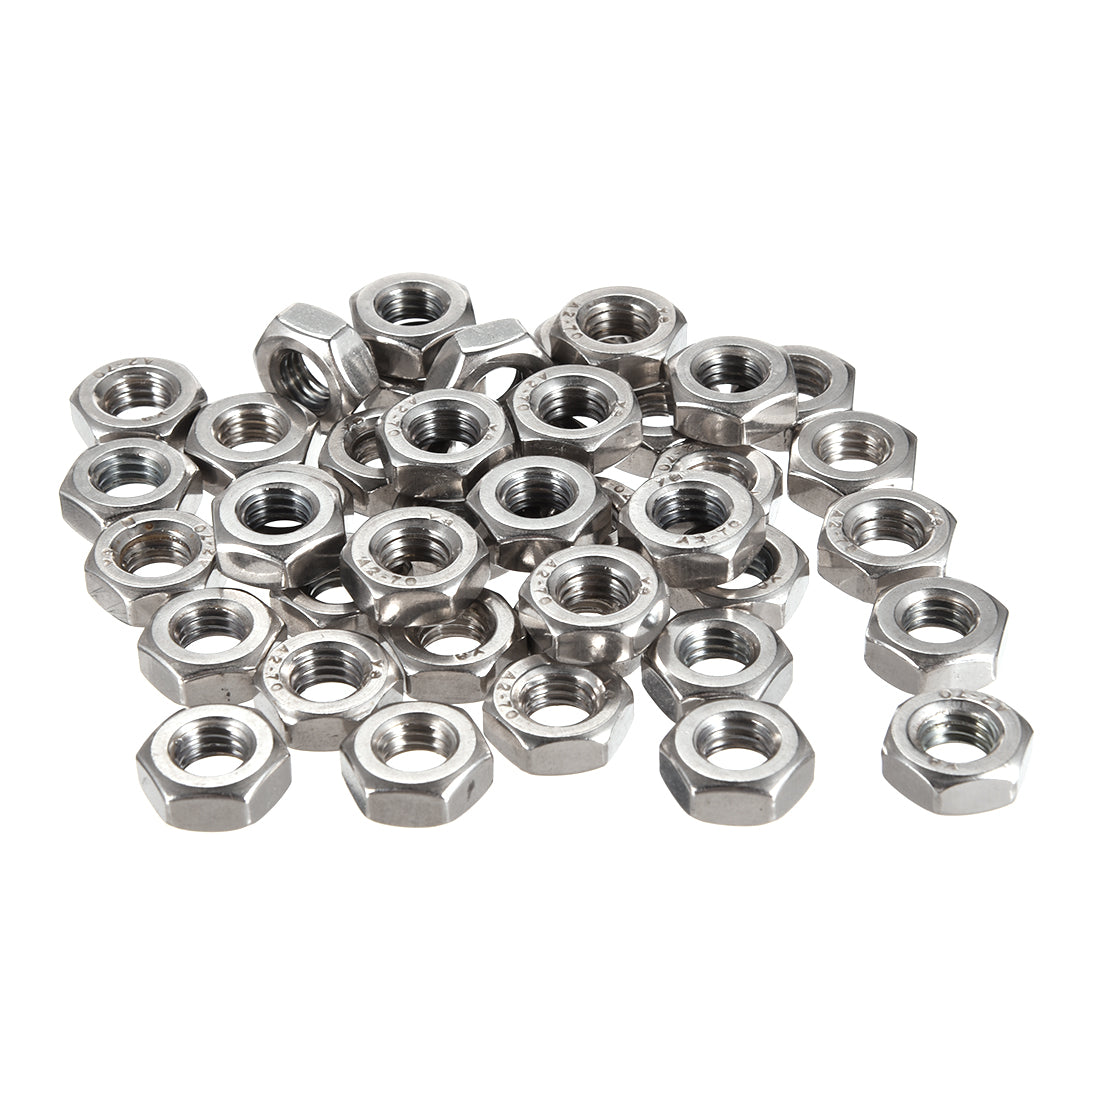 uxcell Uxcell Nickel Plating Metric Carbon Steel Hexagon Hex Nut Silver Tone 200pcs